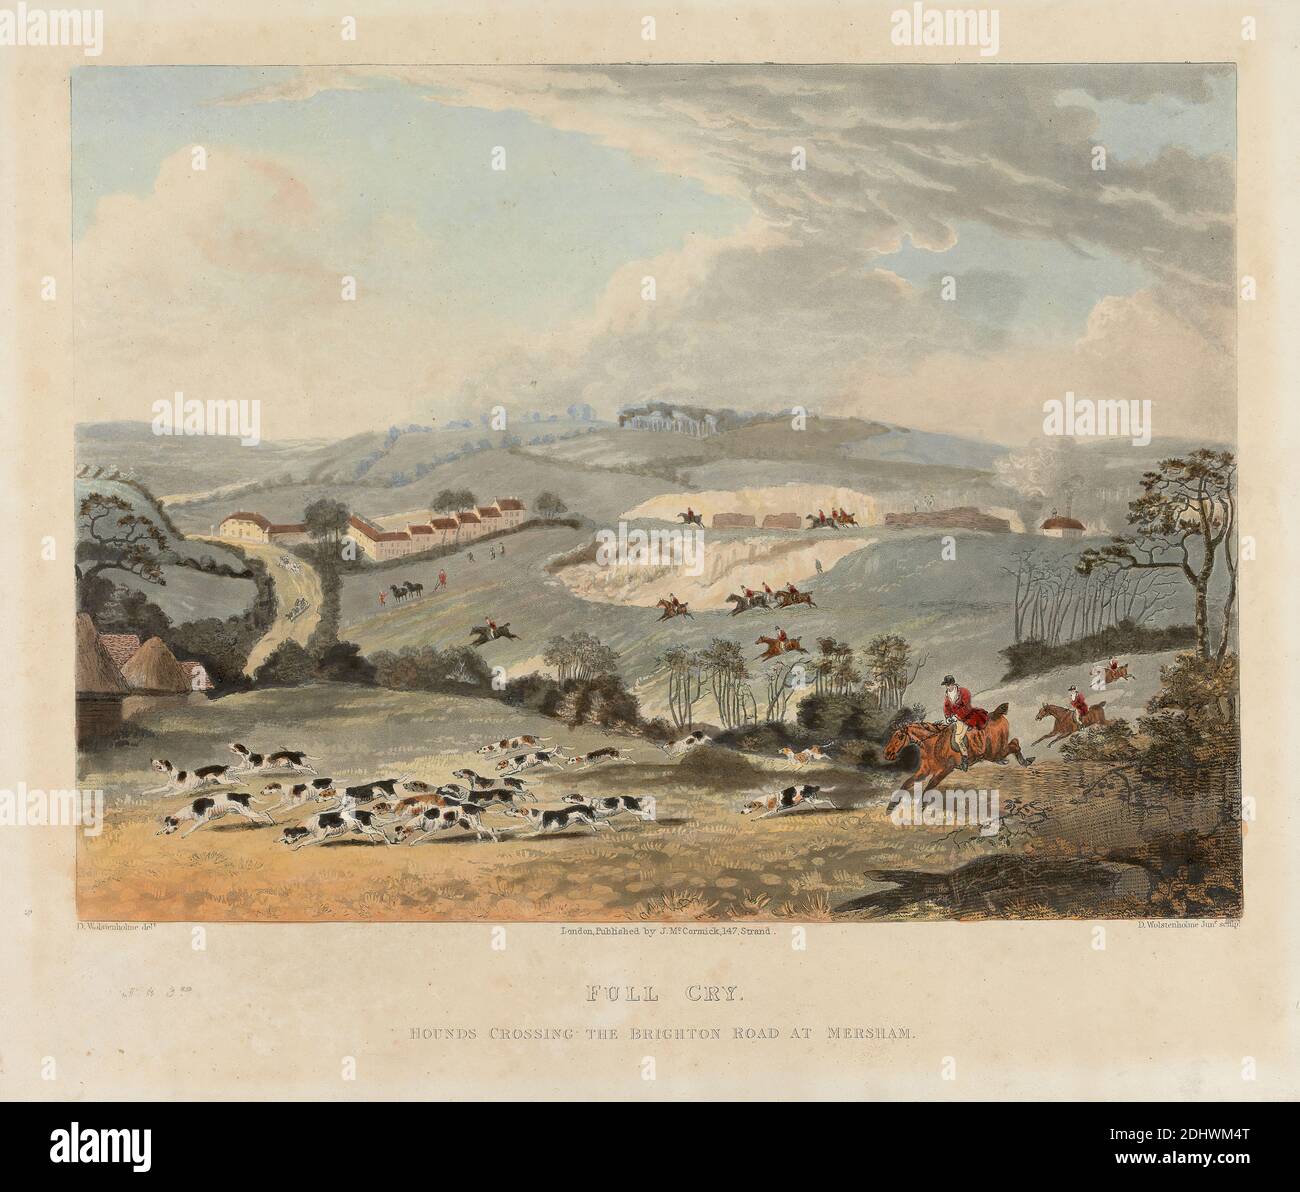 Fox-hunting set of four: (3) Full Cry / Hounds Crossing the Brighton Road at Mersham, Dean Wolstenholme, 1798–1882, British, after Dean Wolstenholme, 1757–1837, British, no date, Aquatint, hand-colored, Sheet: 9 1/4 x 12 3/4in. (23.5 x 32.4cm Stock Photo